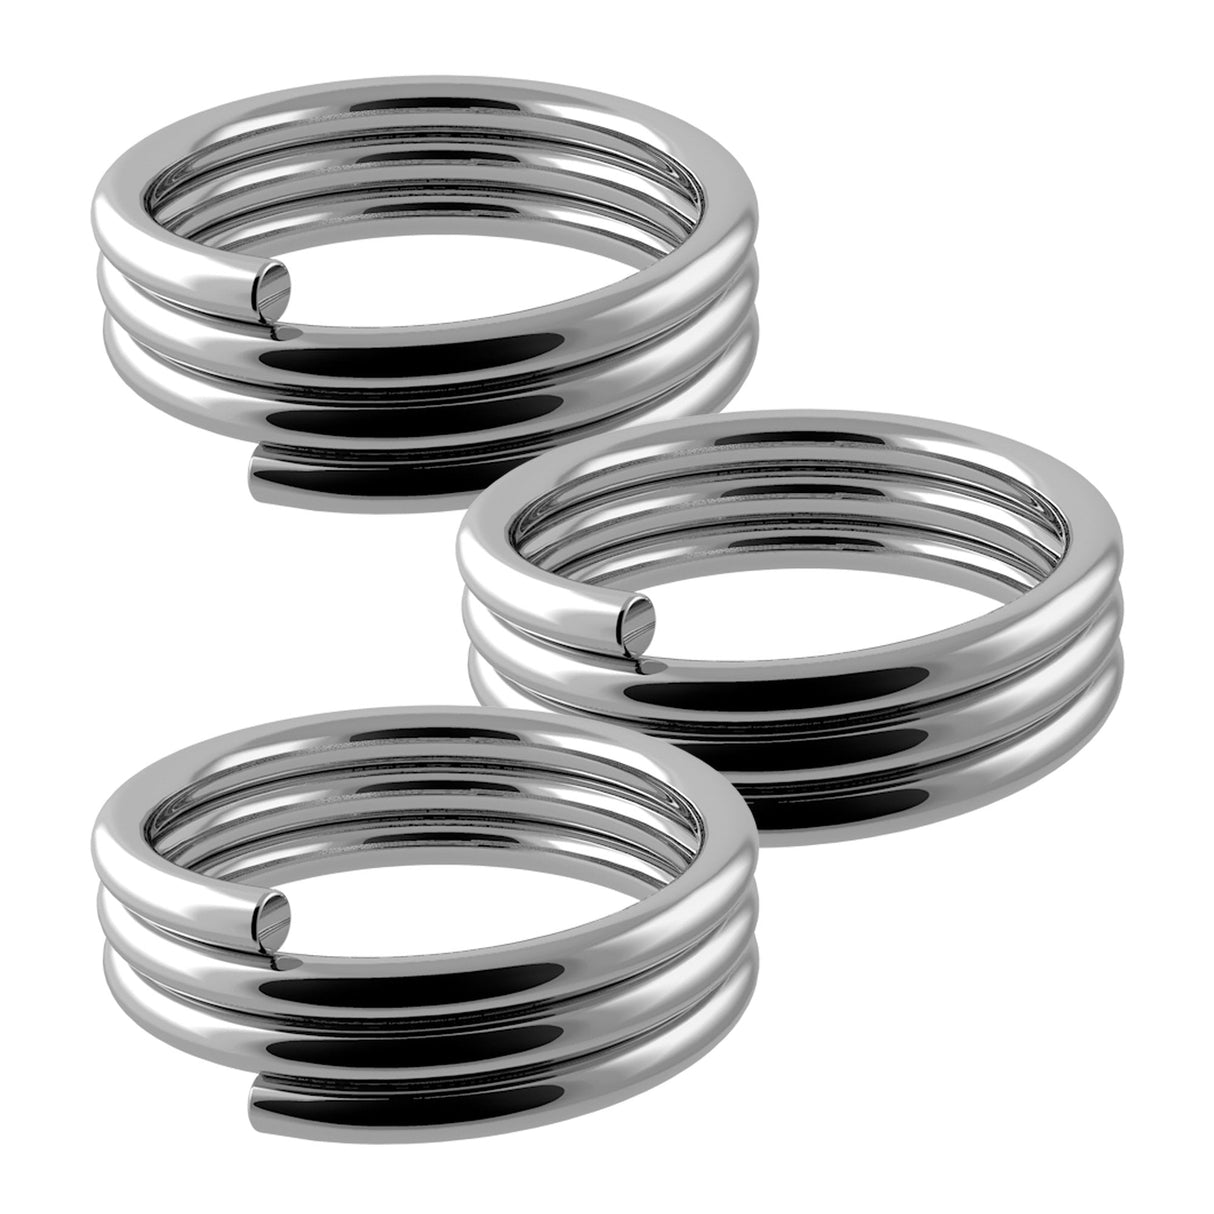 Designa Springs - for use with Nylon Shafts - 10 Sets (30) Silver